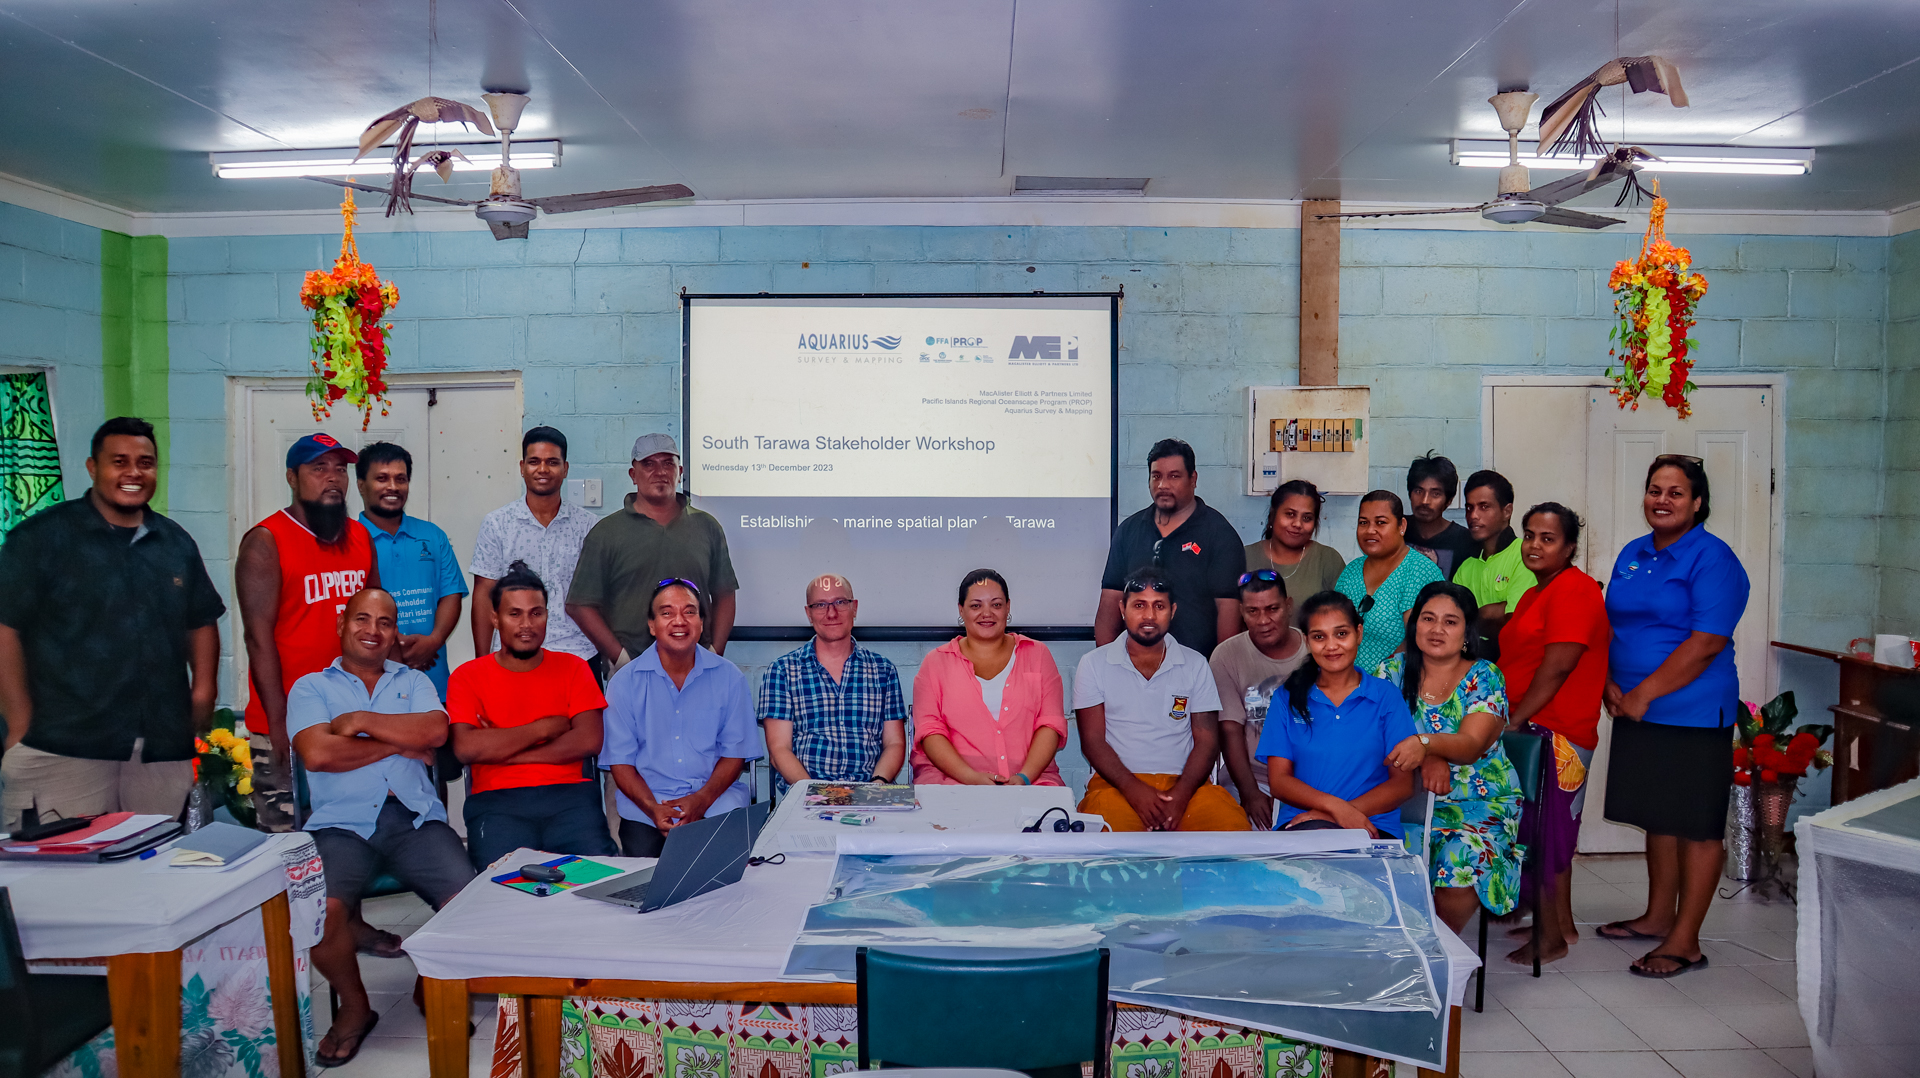 South Tarawa Stakeholder workshop for Marine Spatial Planning